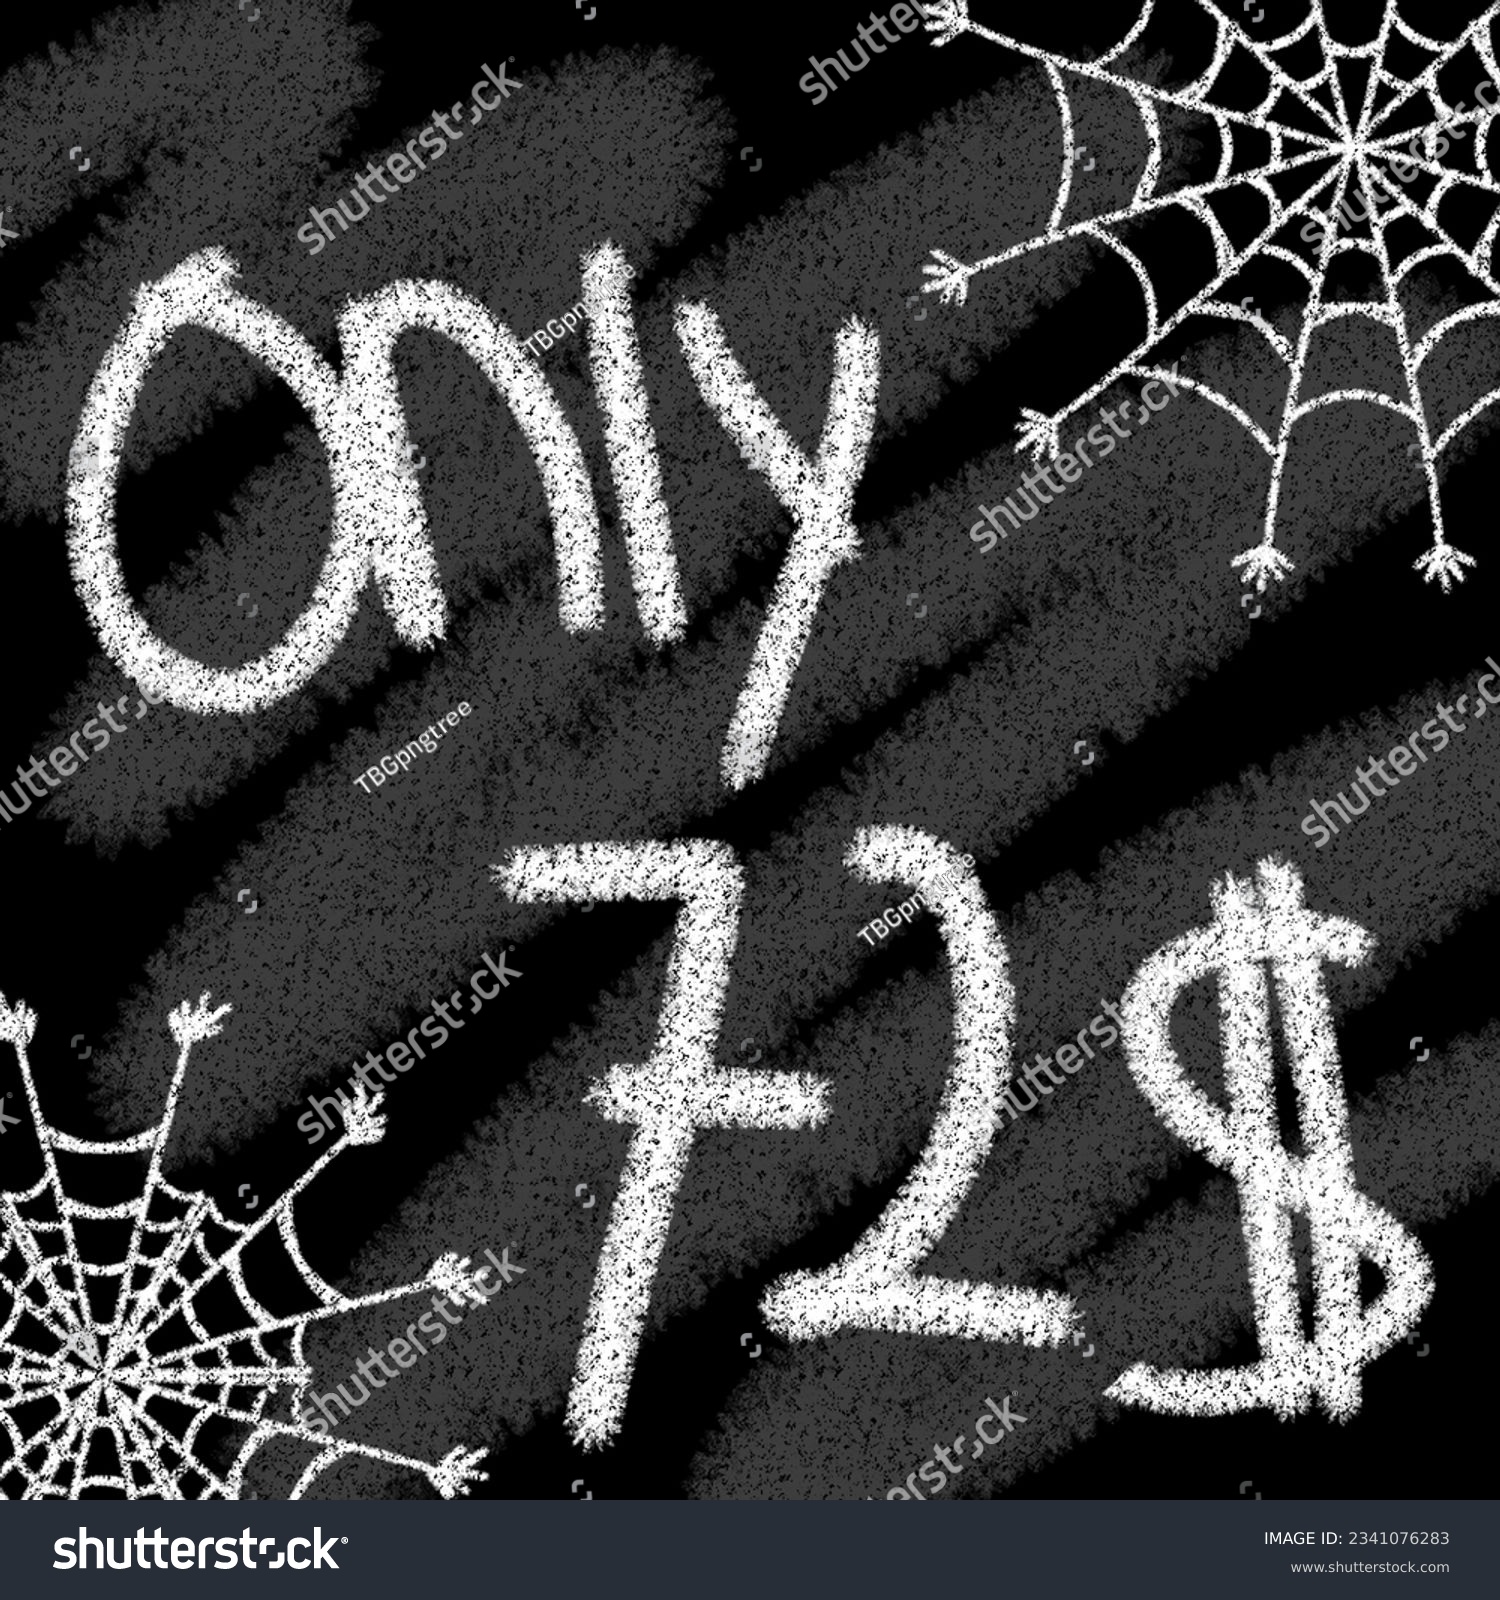 SVG of Only 70 71 72 73 74 75 76 77 78 79 80 81 82 83 84 85 86 87 88 89 90 91 92 93 94 95 96 97 98 99 100 dollar banner with typographic style chalk and blackboard helloween with spider web  svg